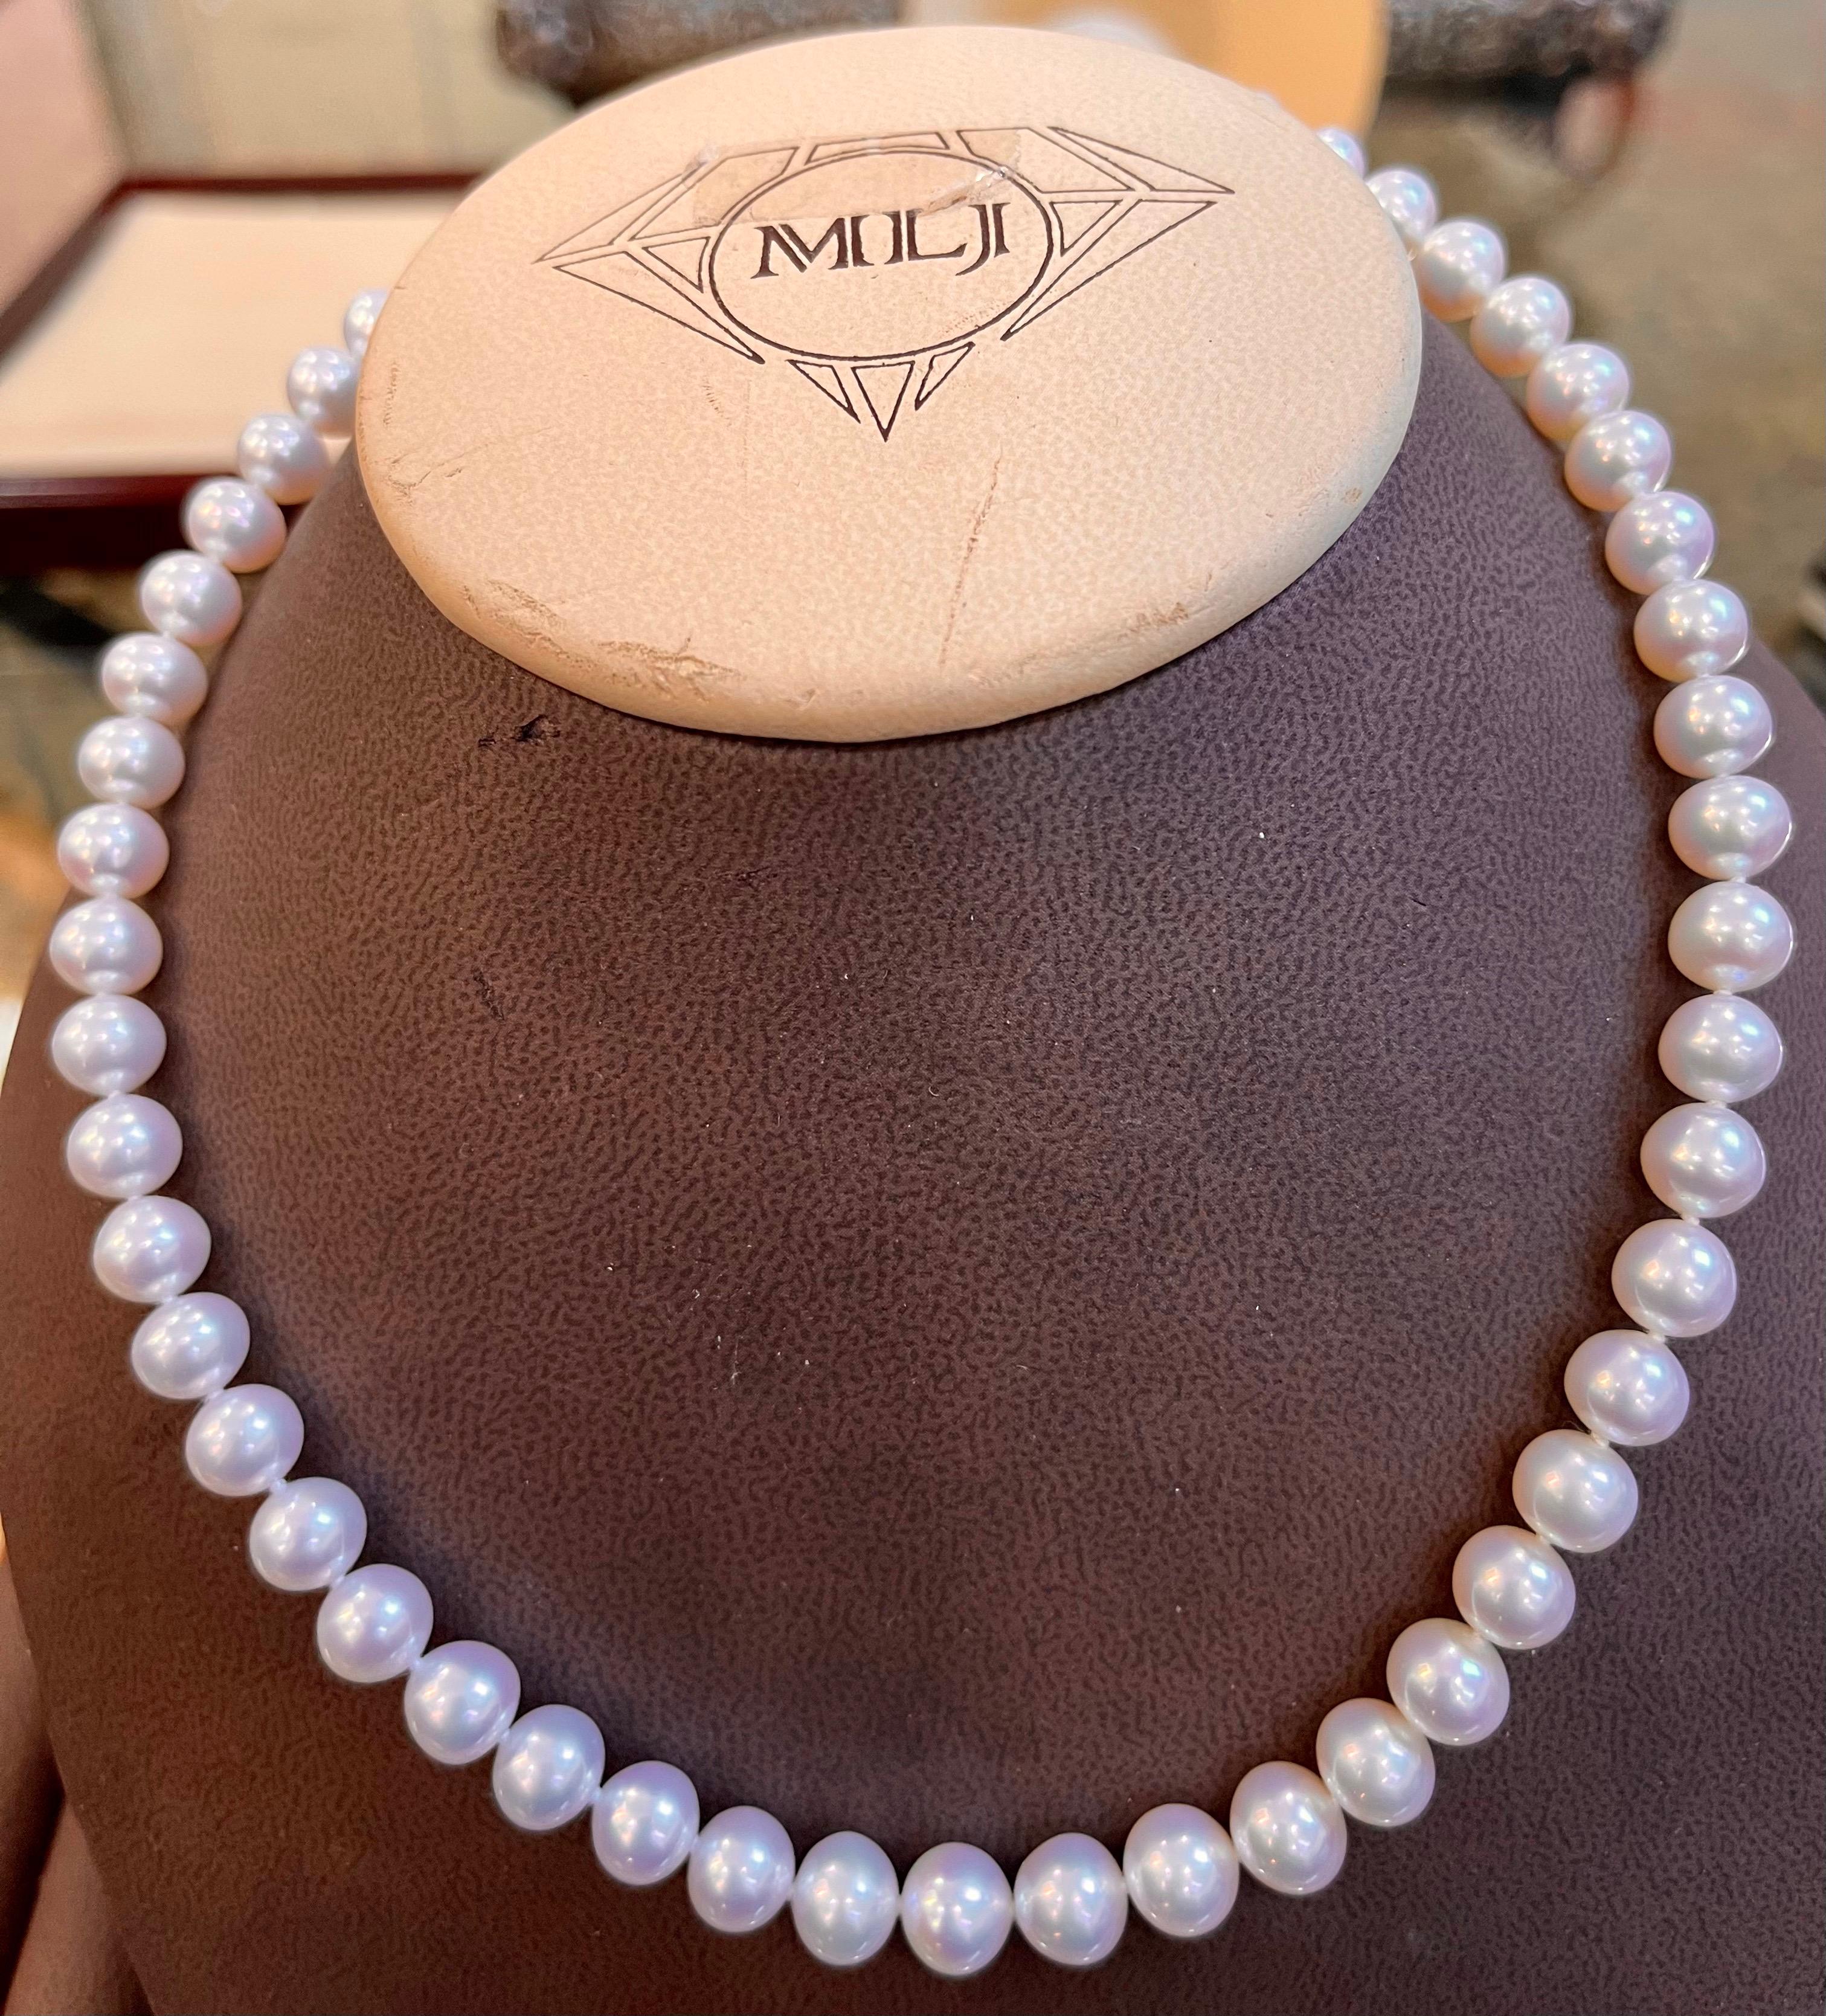 50 Round Akoya Pearls Strand Necklace Set in 14 Karat Gold Clasp In Excellent Condition For Sale In New York, NY